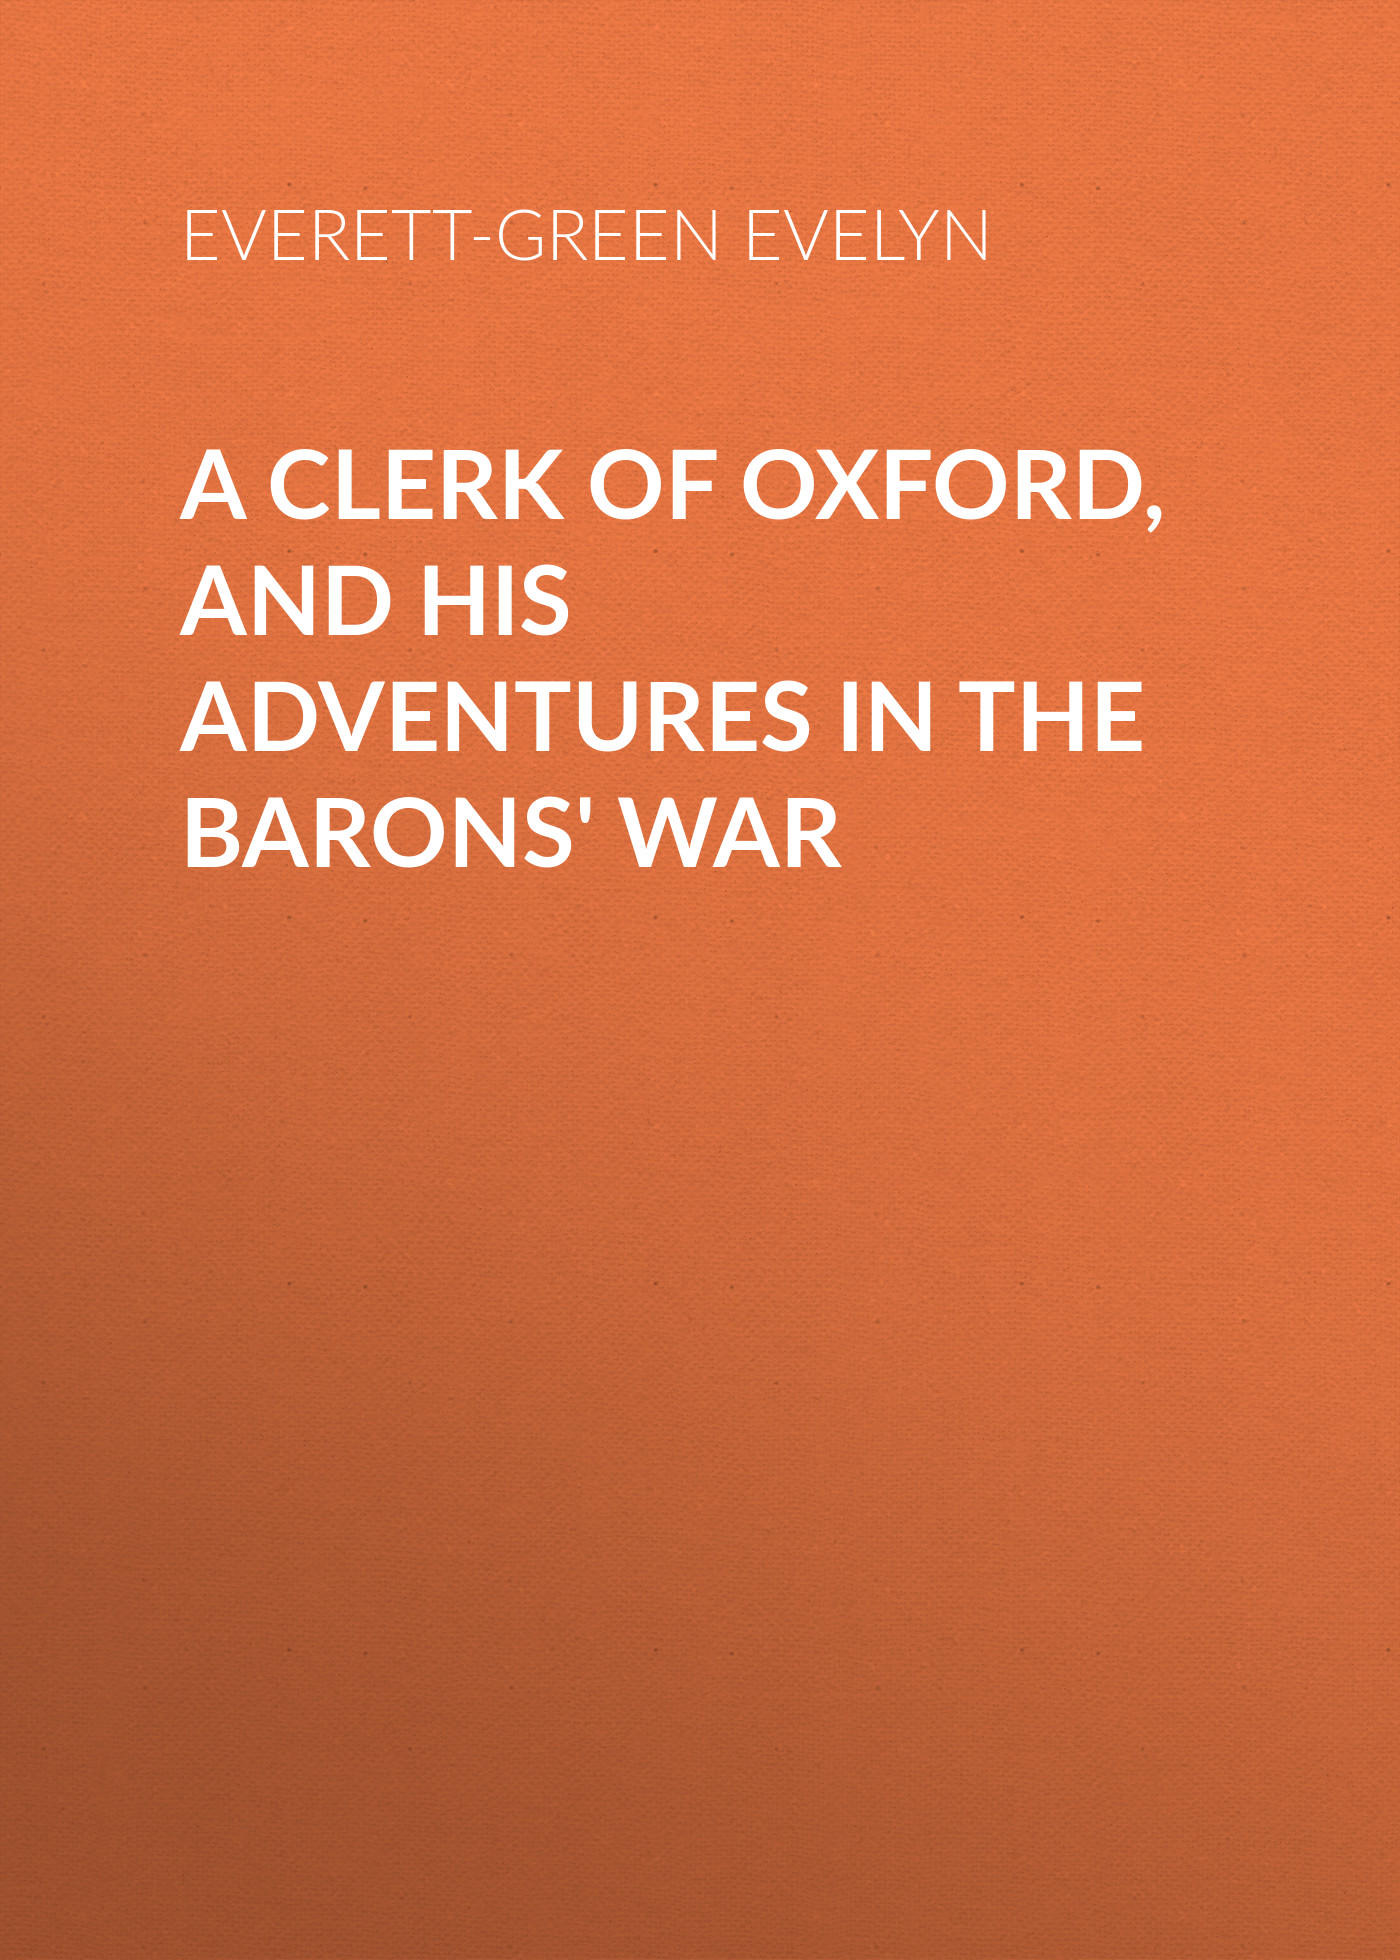 A Clerk of Oxford, and His Adventures in the Barons'War